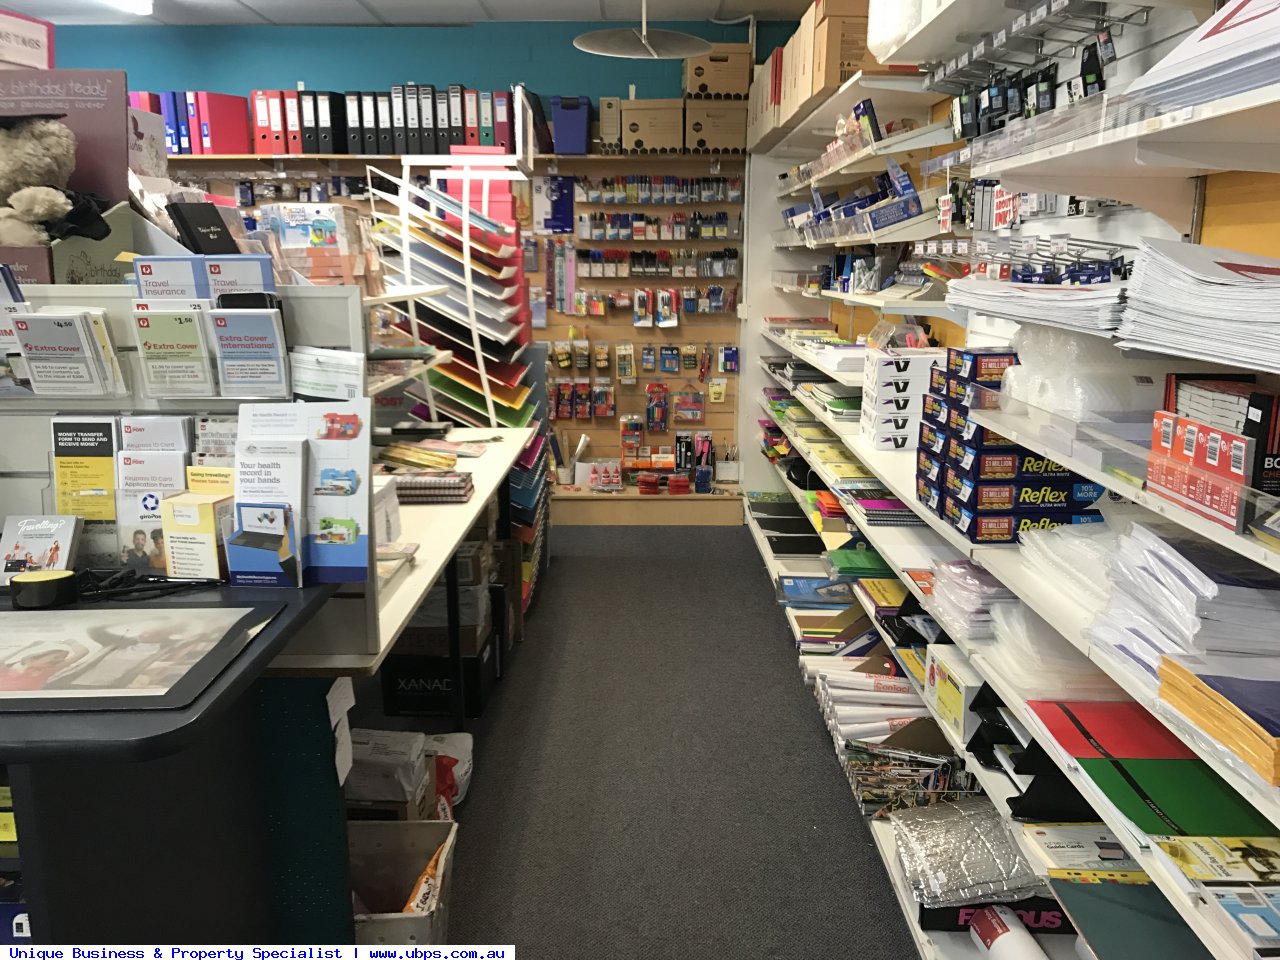 All Agencys - Post Office, Newsagency, Lotteries